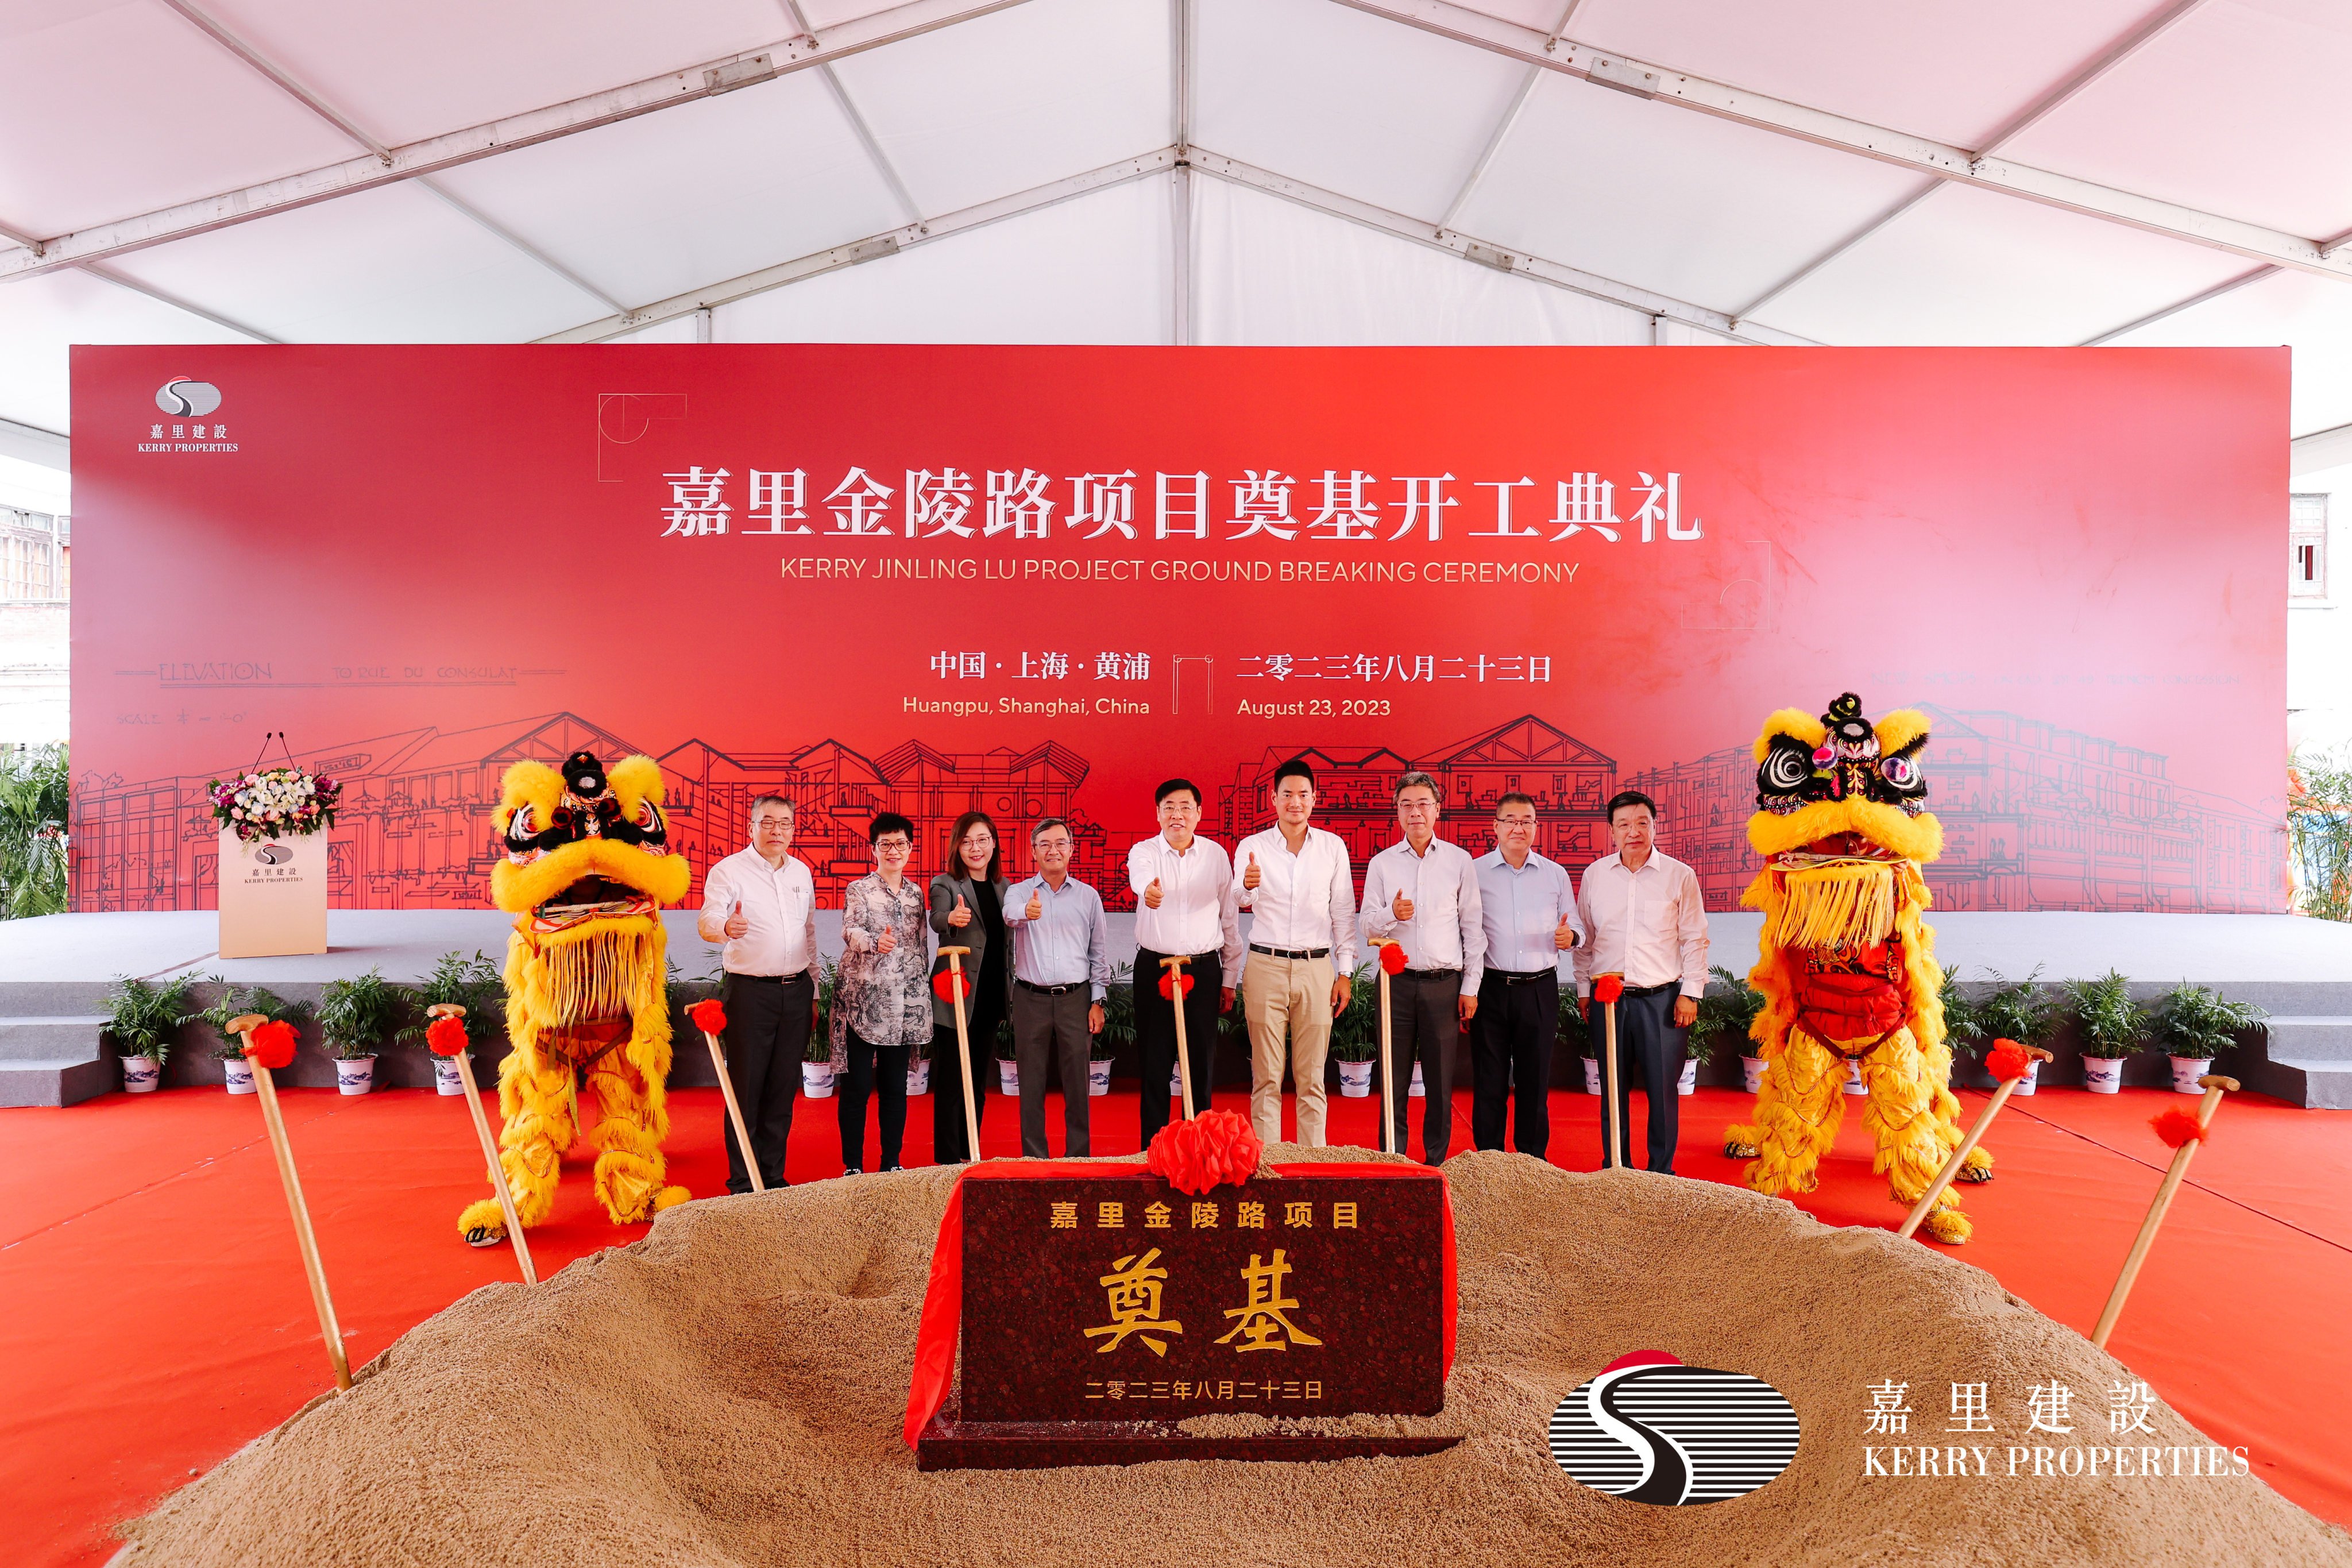 Officials from Shanghai government and Kerry Properties at a ground breaking ceremony for the company’s mixed-use project on Wednesday. Photo: Handout